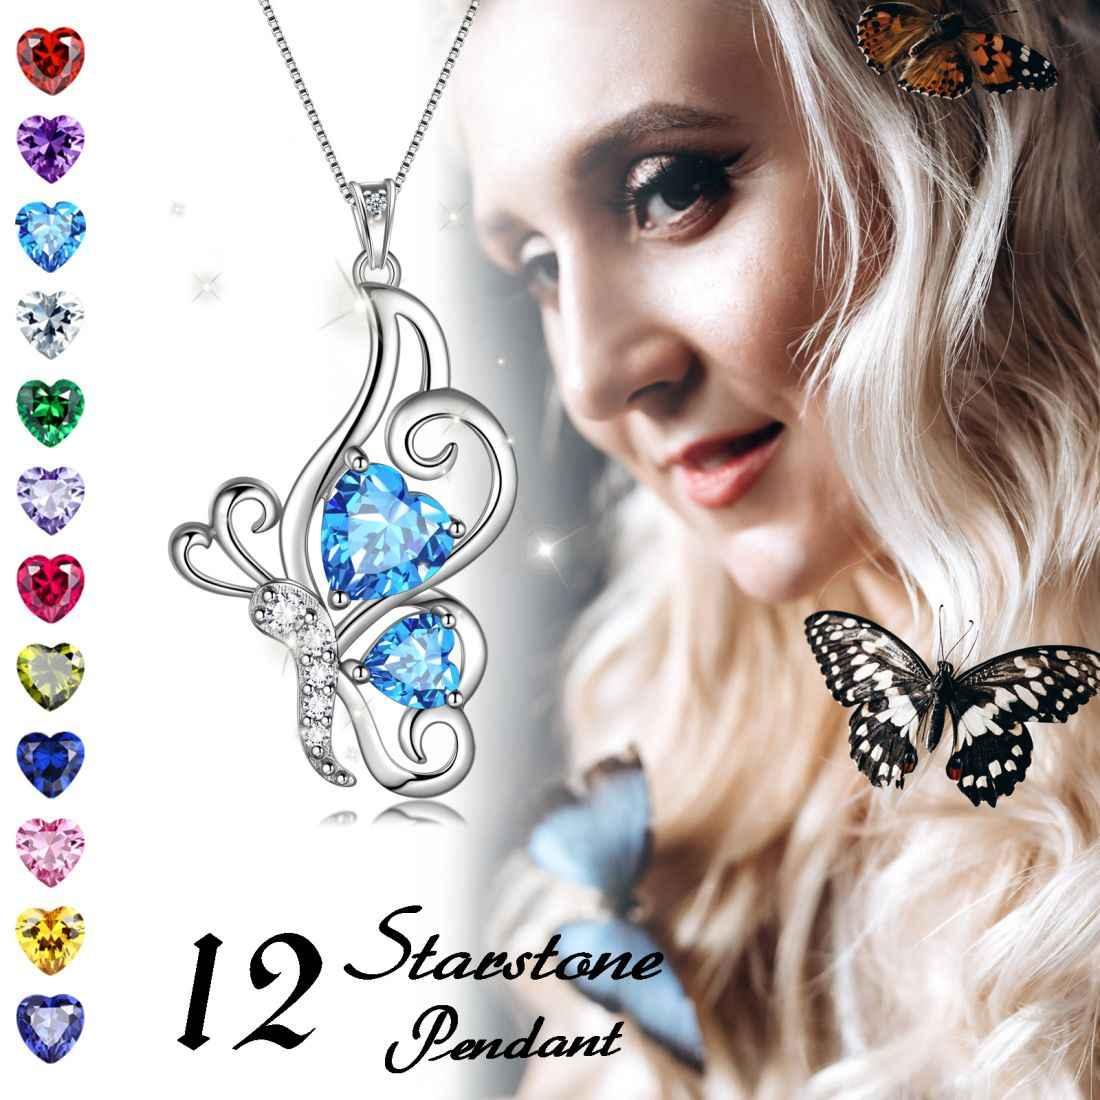 Butterfly Birthstone July Ruby Necklace Sterling Silver - Necklaces - Aurora Tears